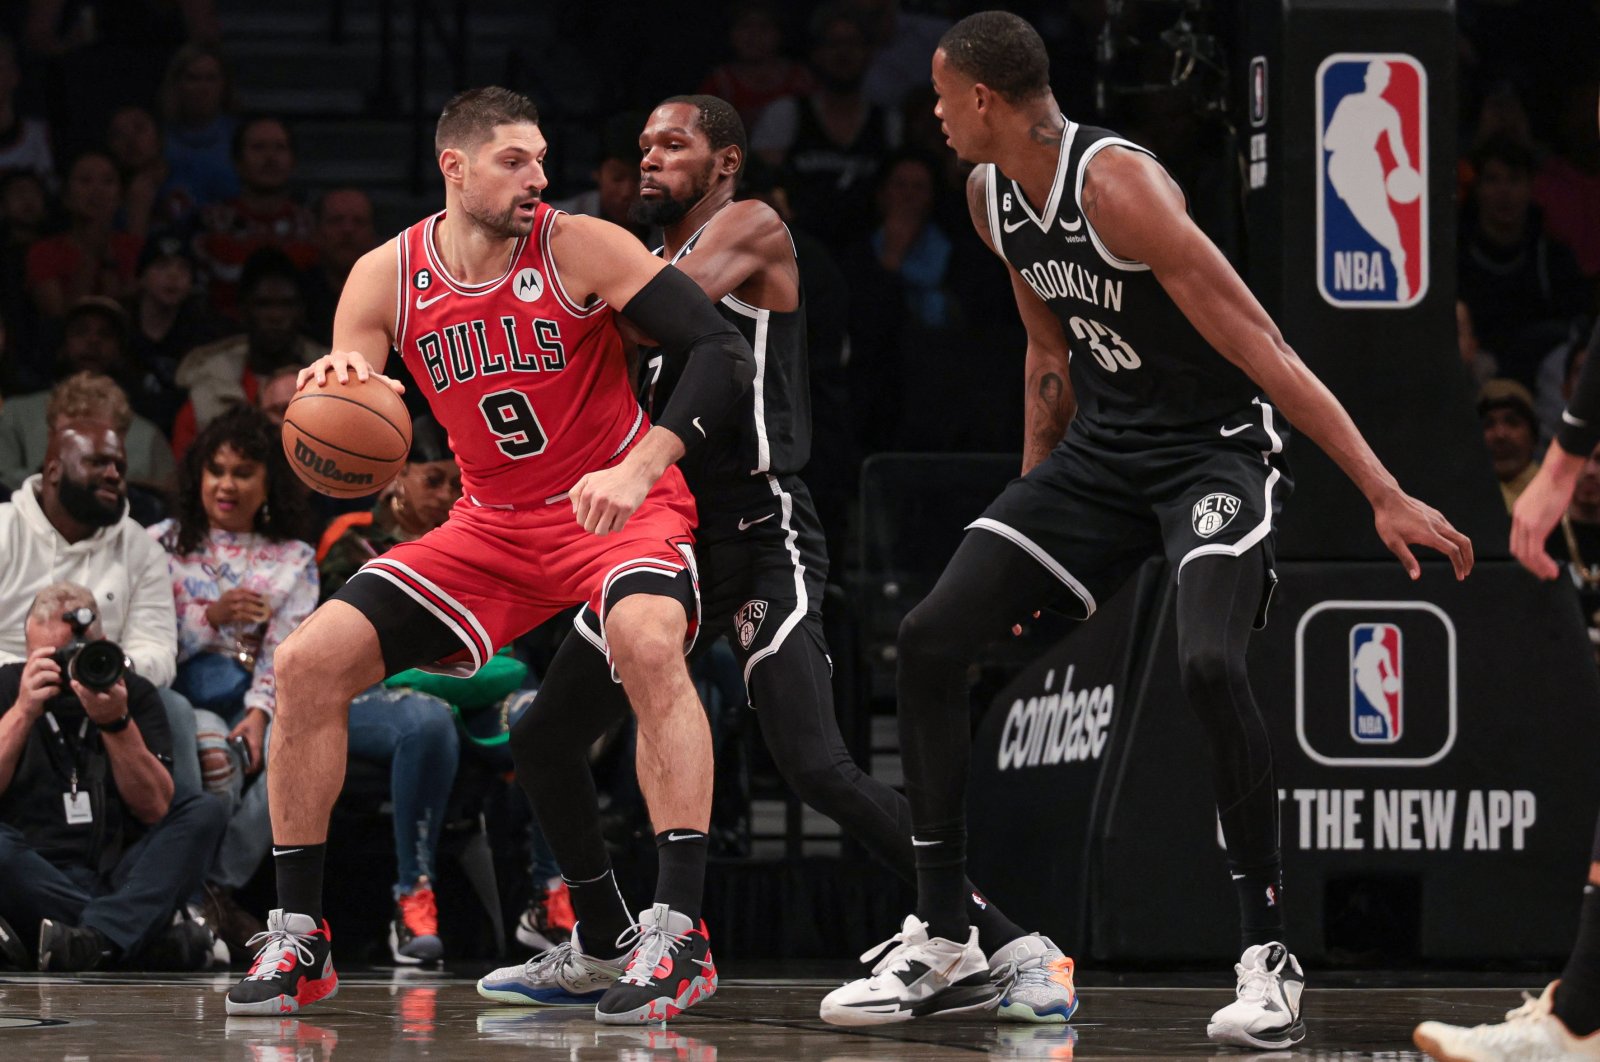 Chicago Bulls center Nikola Vucevic (9) is guarded by Brooklyn Nets forward Kevin Durant (7) in front of forward Nic Claxton (33) during the first quarter at the Barclays Center, Brooklyn, New York, U.S., Nov. 1, 2022. (Reuters Photo)